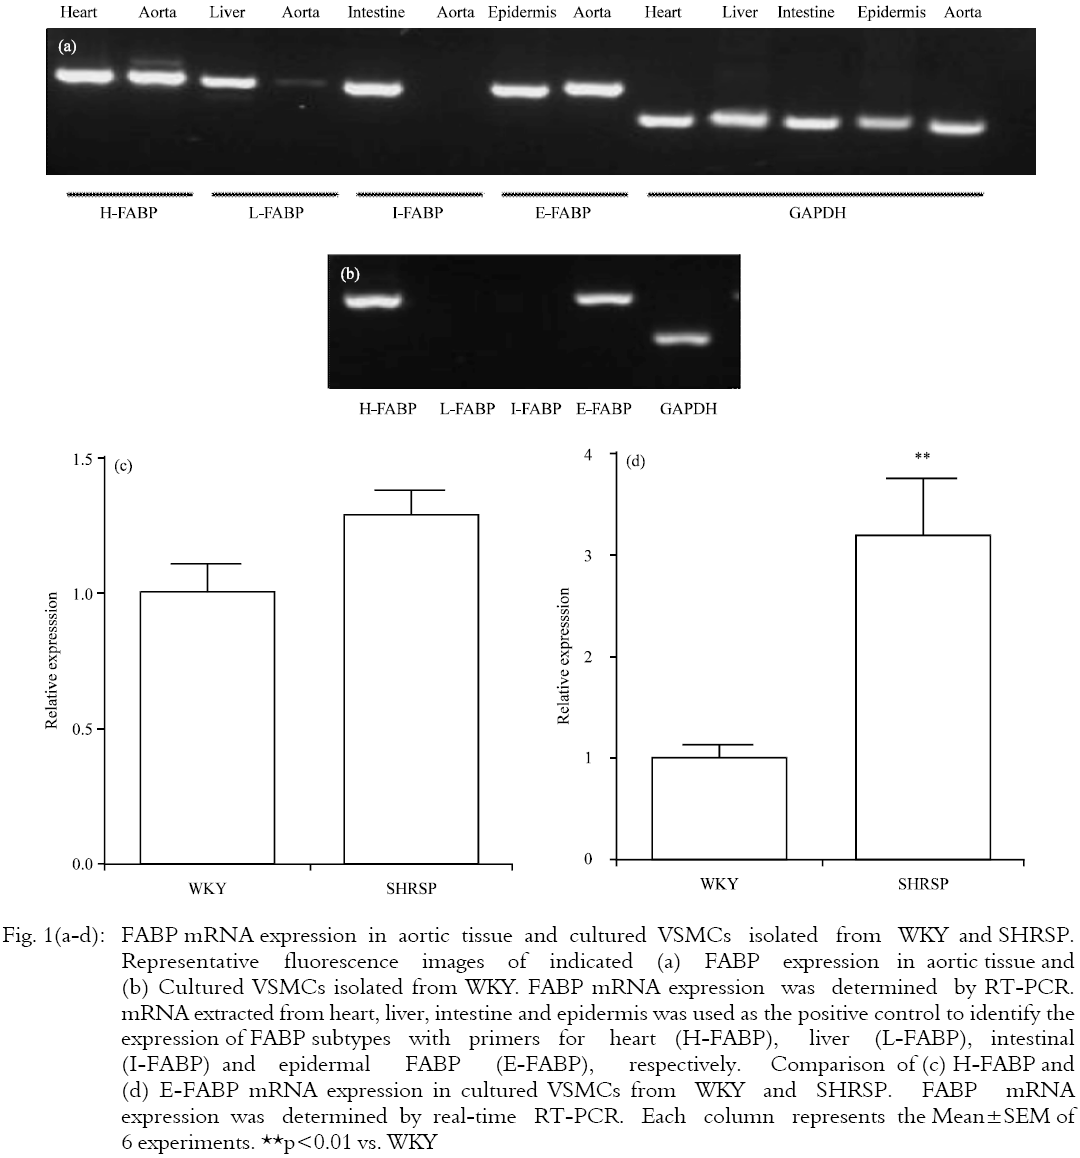 Image for - Comparison of Fatty Acid-binding Protein Expression in Vascular Smooth Muscle Cells from Stroke-prone Spontaneously Hypertensive and Wistar Kyoto Rats